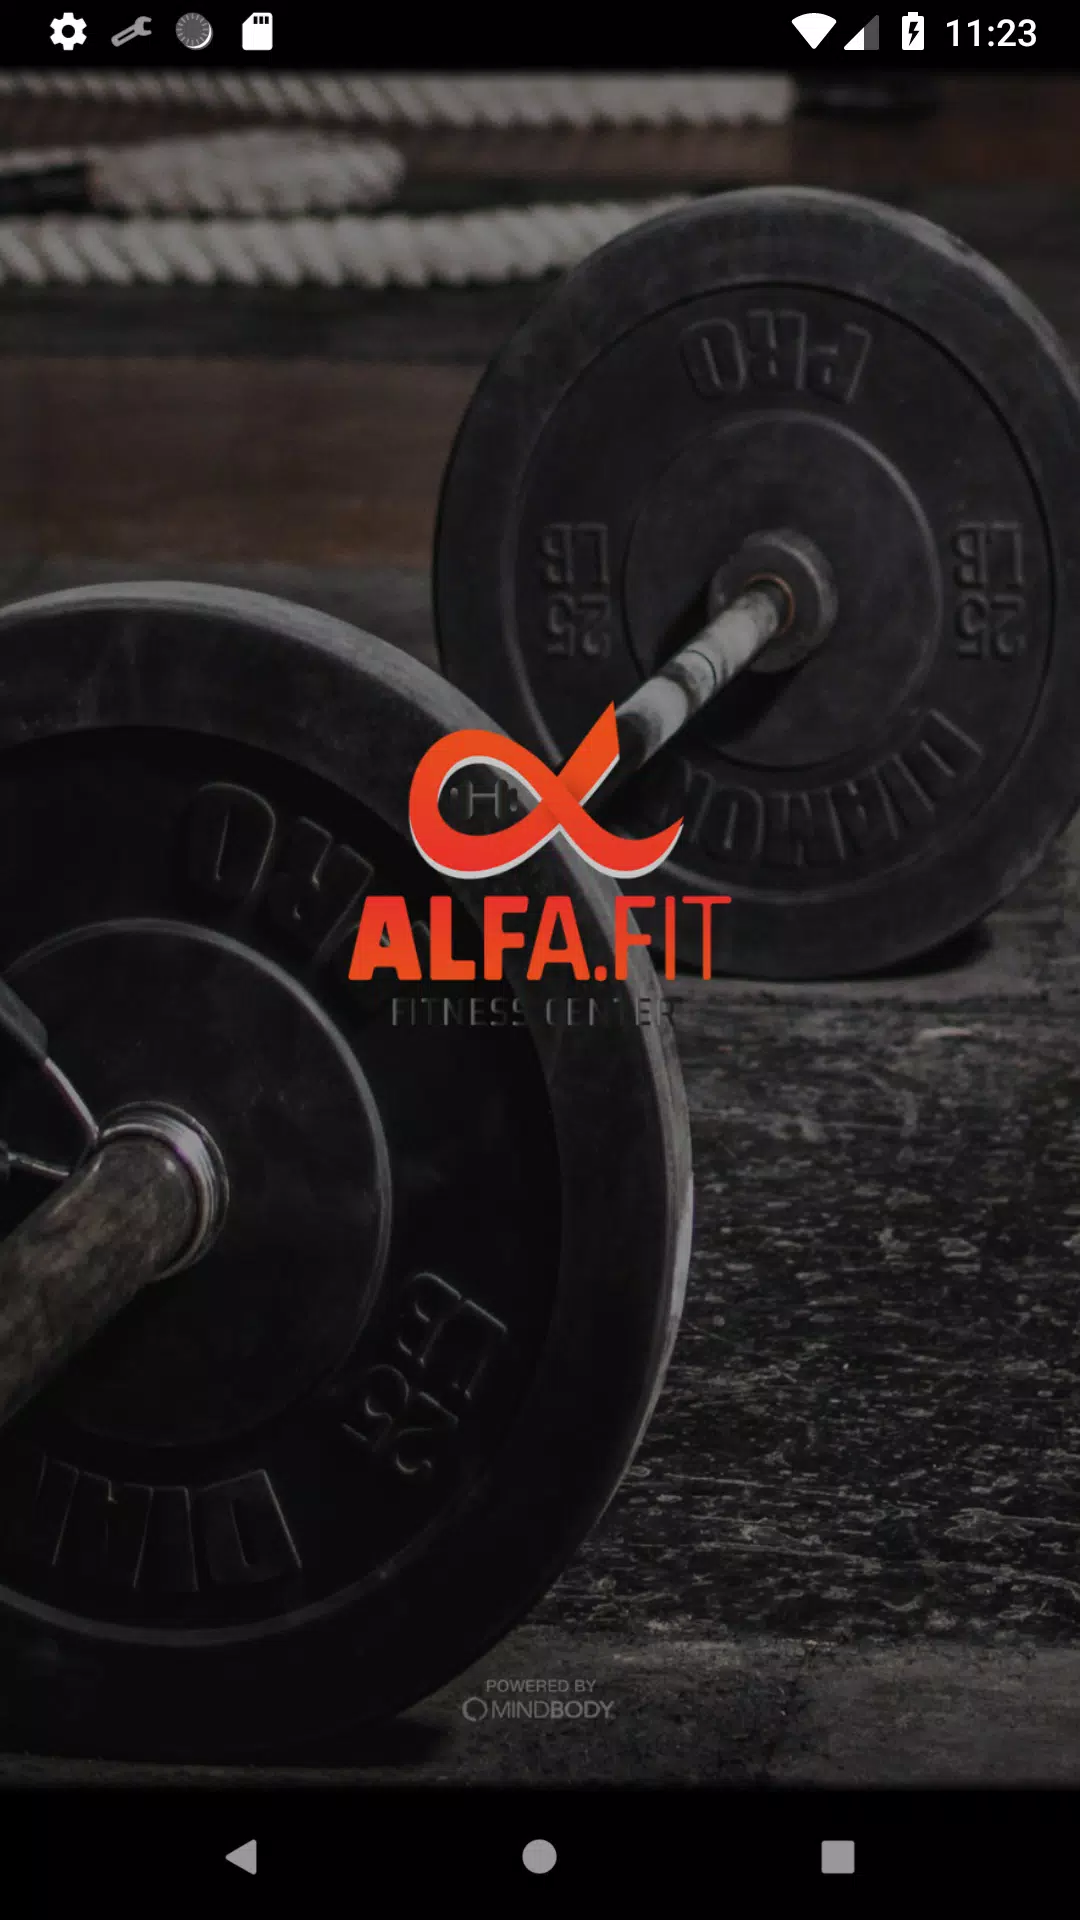 Alfa Fit Fitness Center APK voor Android Download